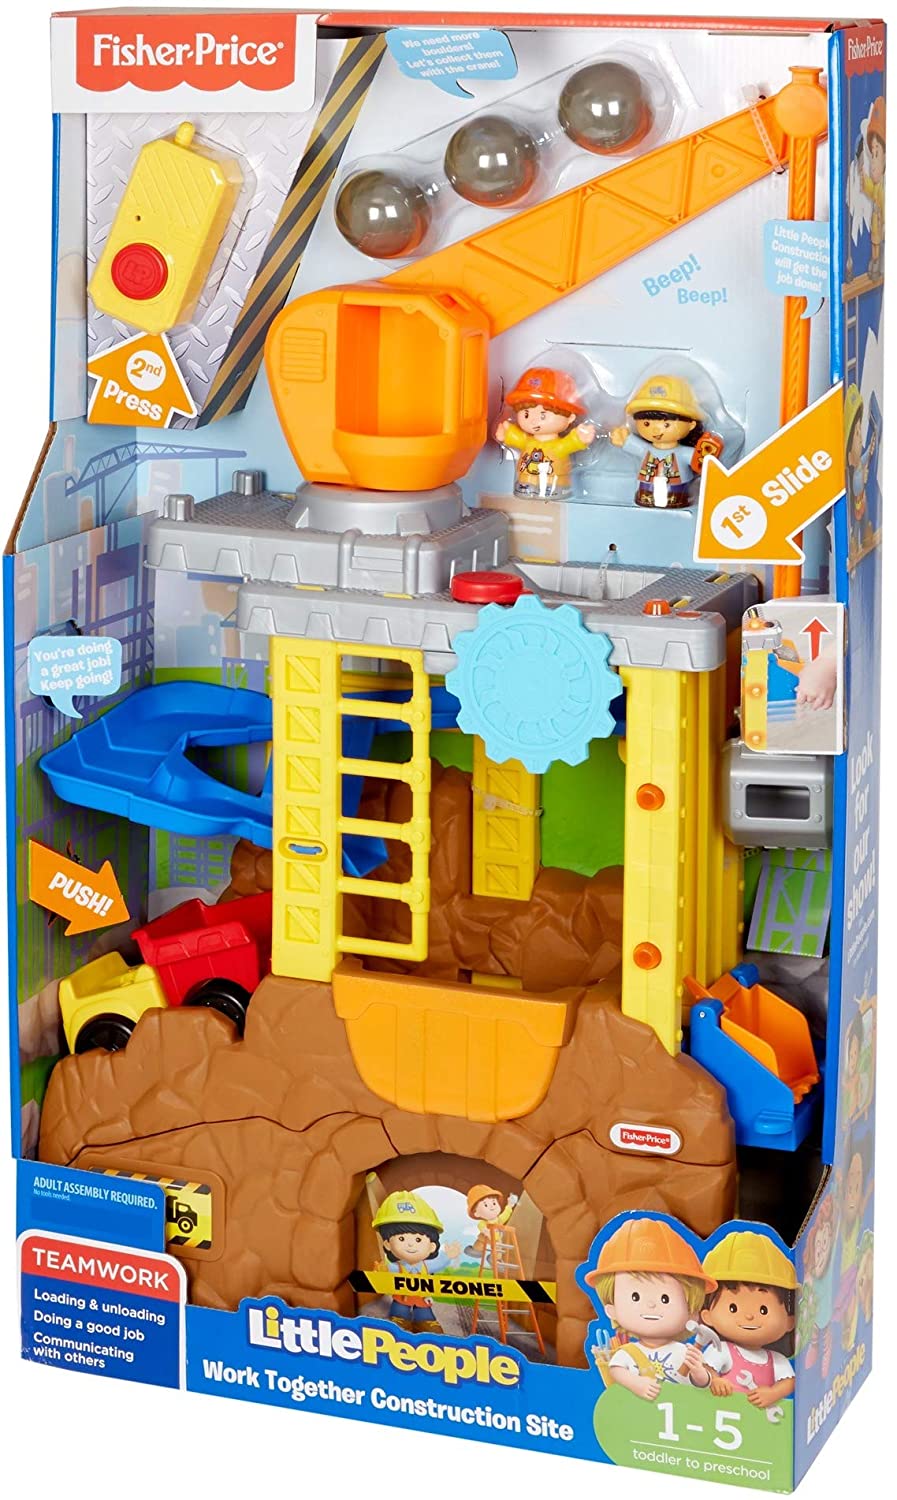 Fisher Price Little People Work Together Construction Site